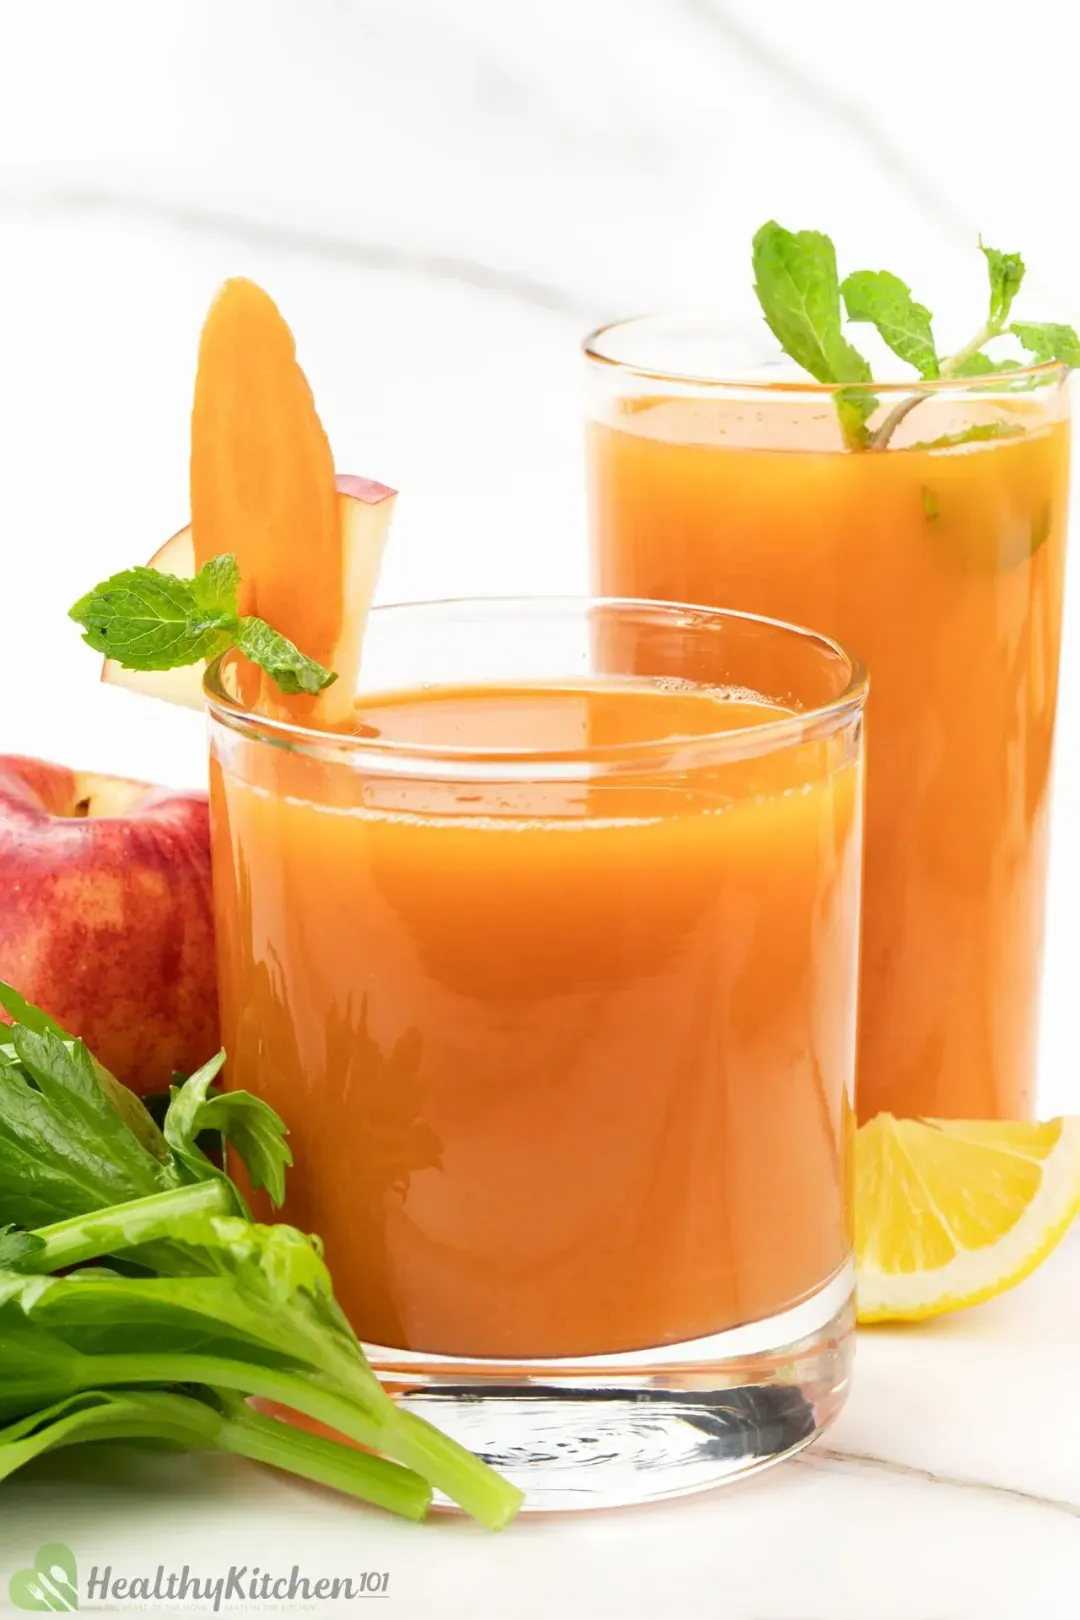 Two short glasses of carrot celery juice garnished with some celery leaves, a carrot slice, next to an apple